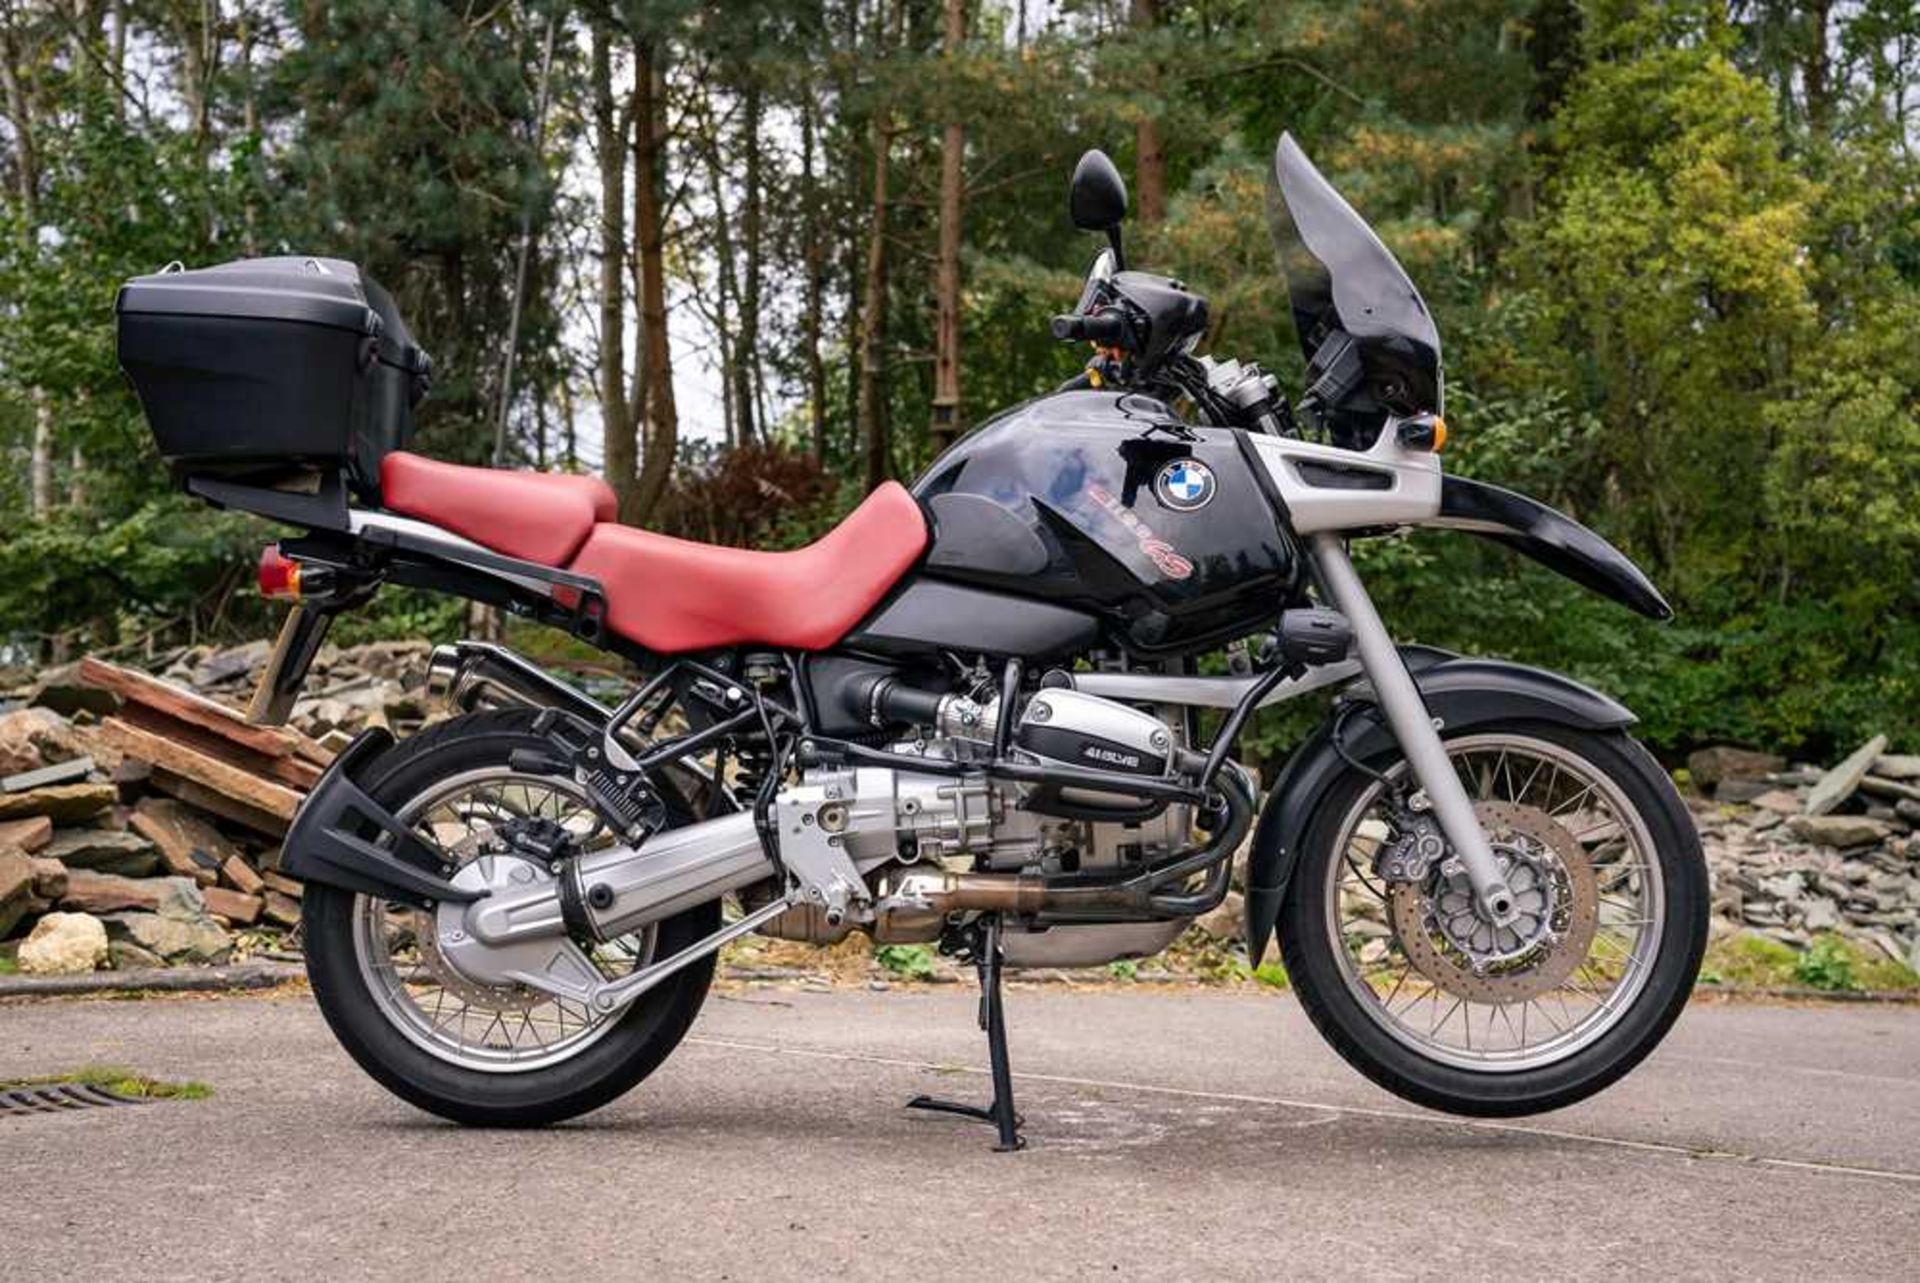 2000 BMW R1100GS Fitted with panniers, top box, and engine bars